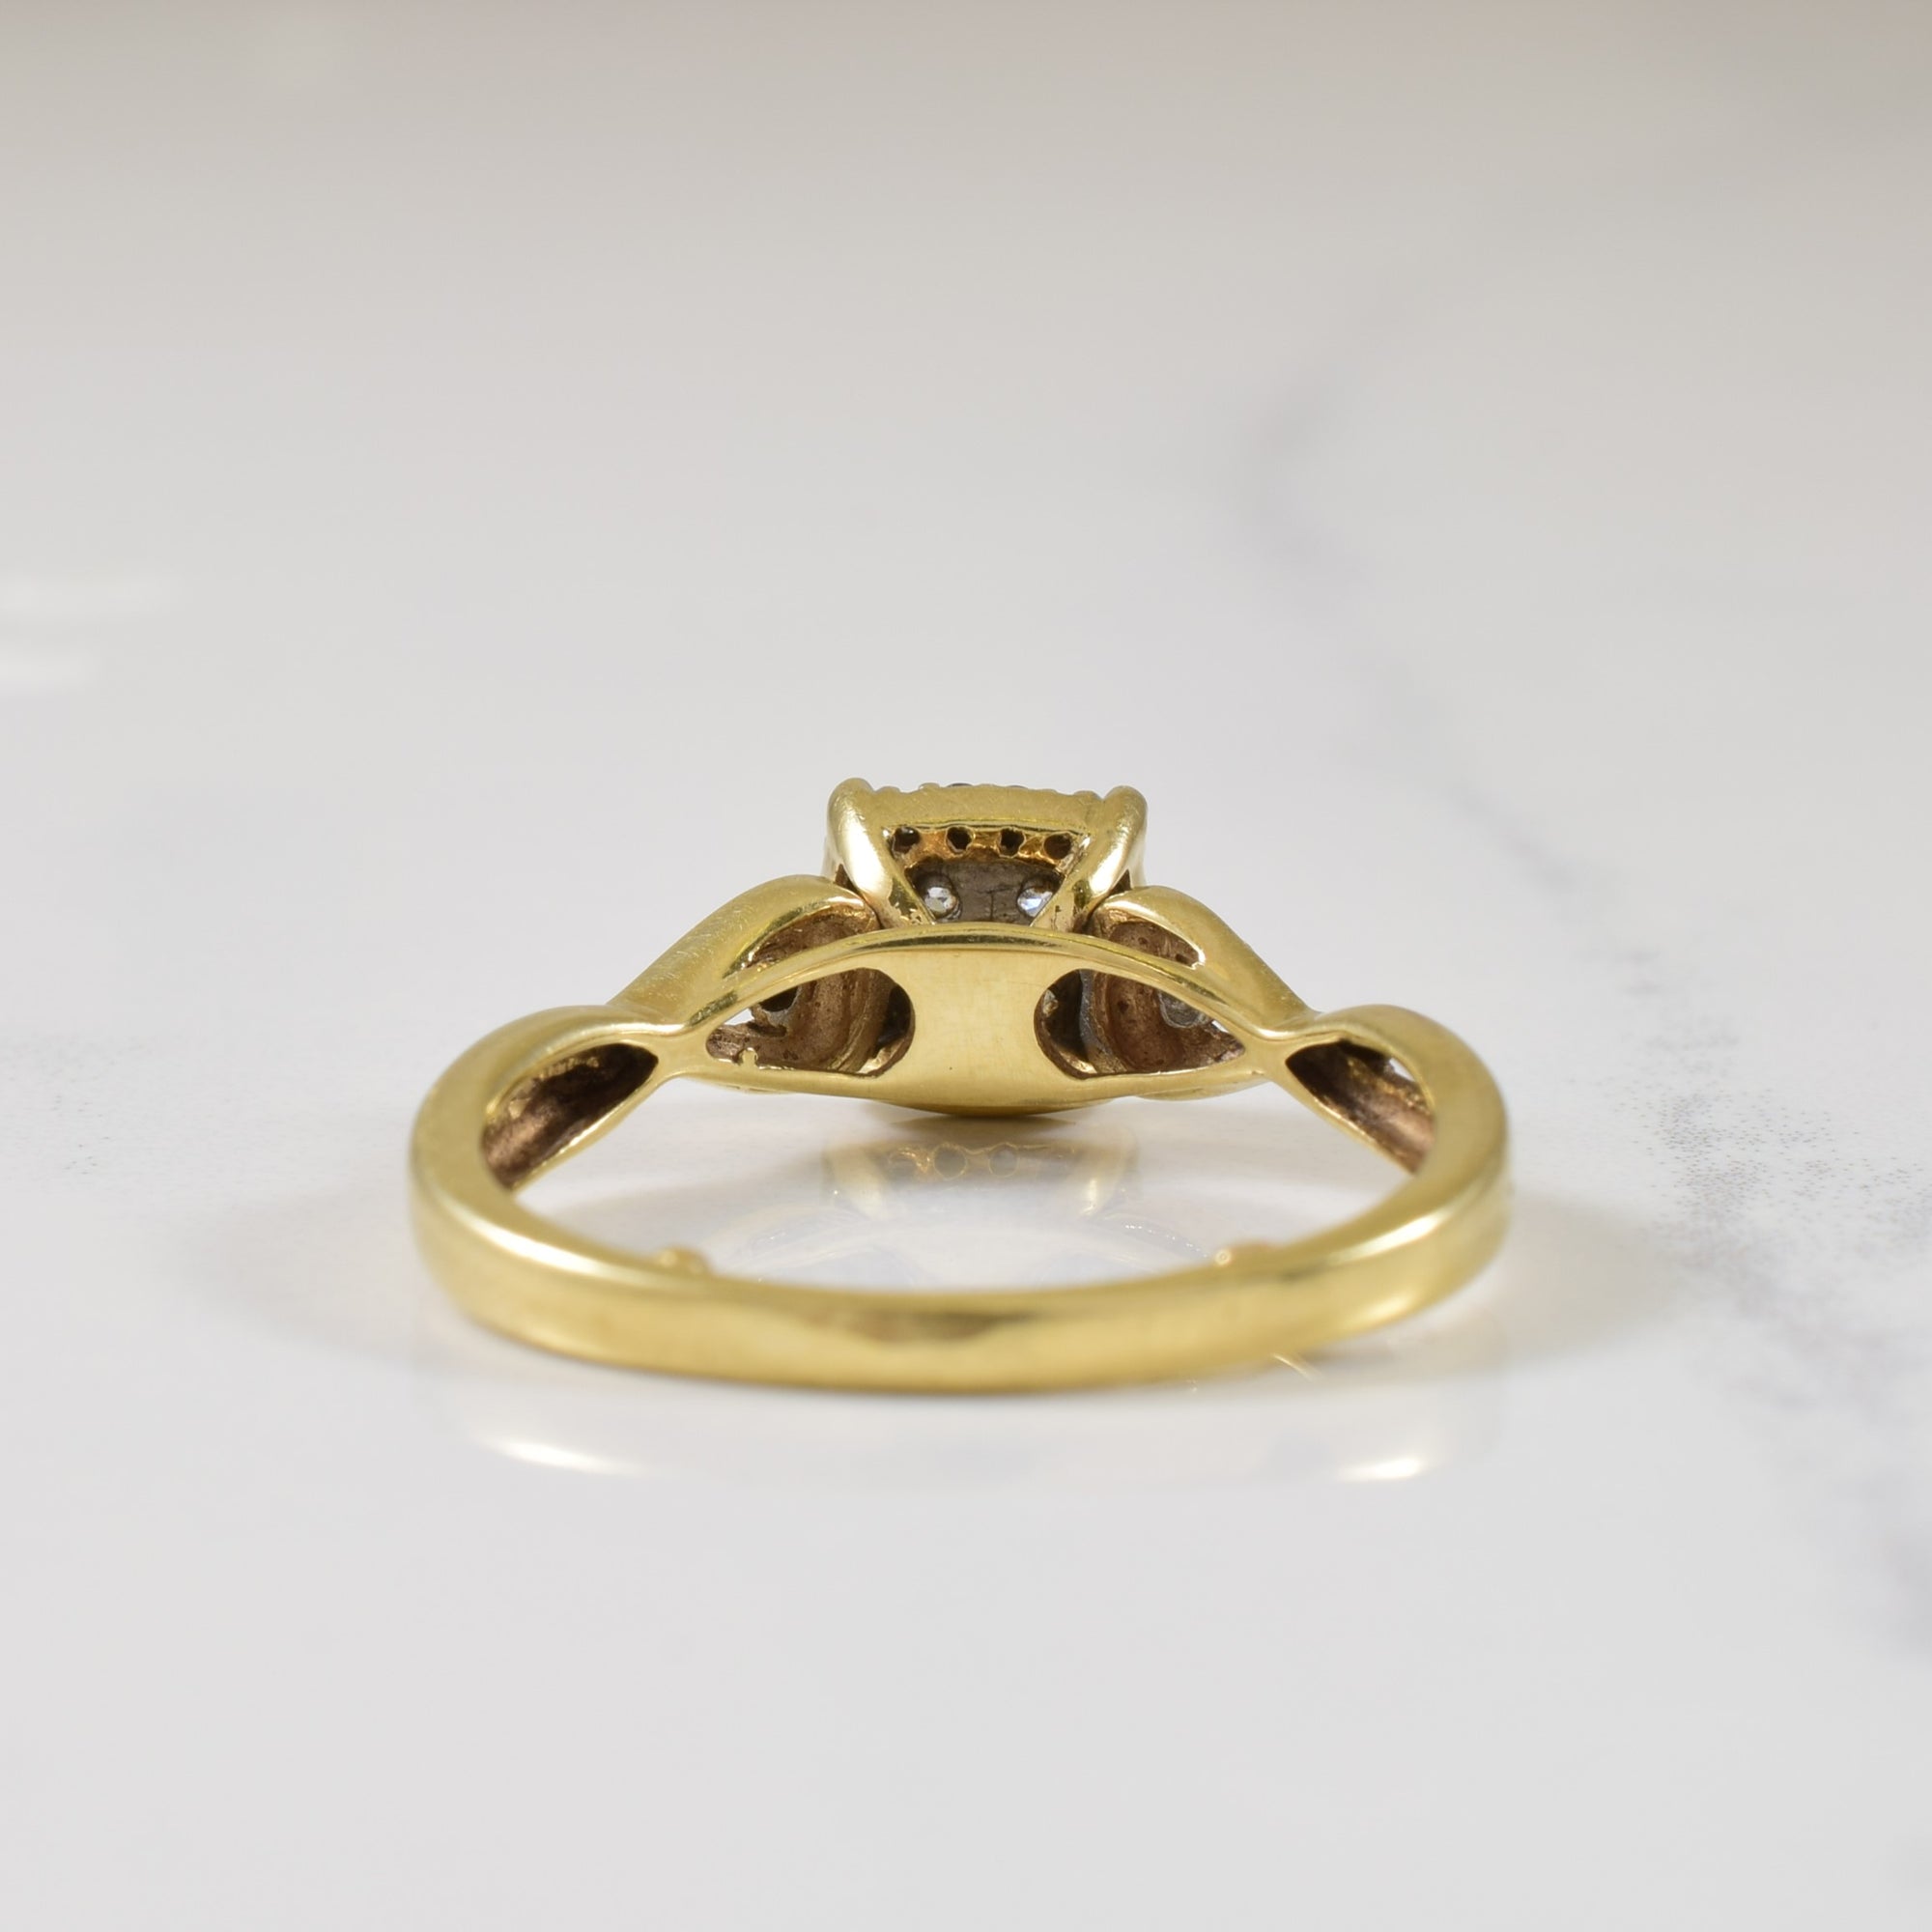 Diamond Halo Ring with Accents | 0.28ctw | SZ 5.25 |